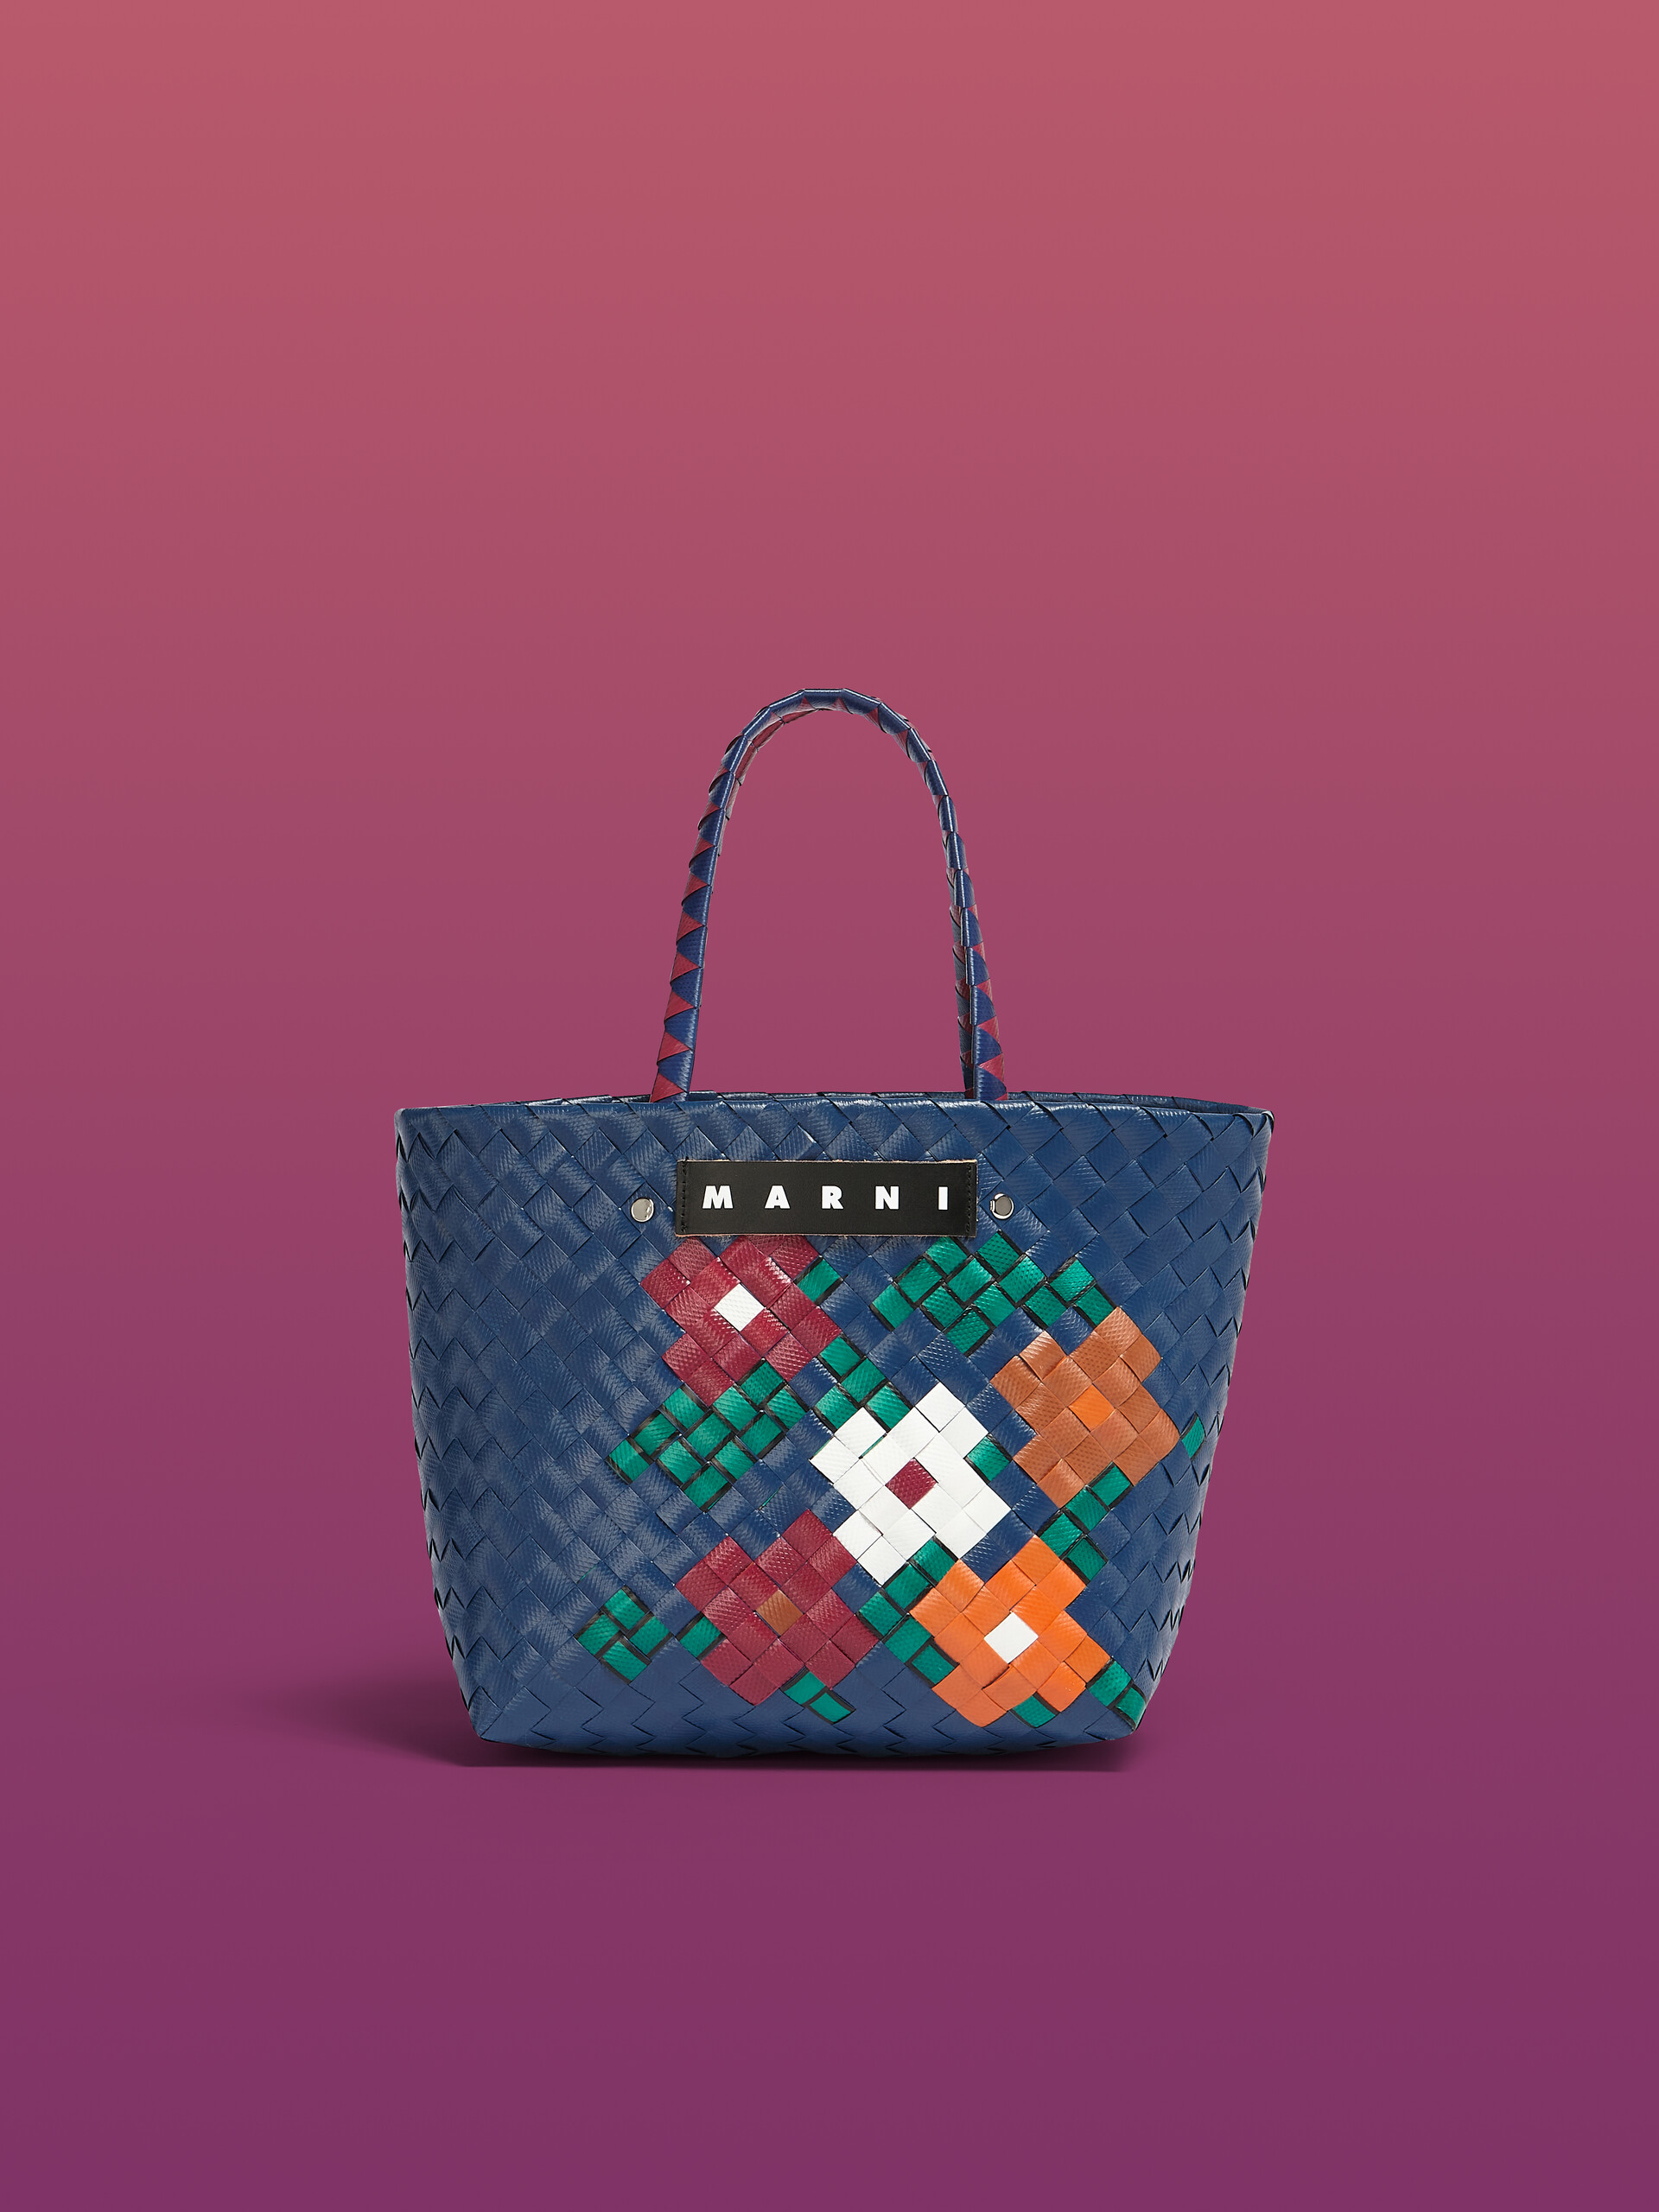 MARNI MARKET small bag in blue flower motif - Bags - Image 1